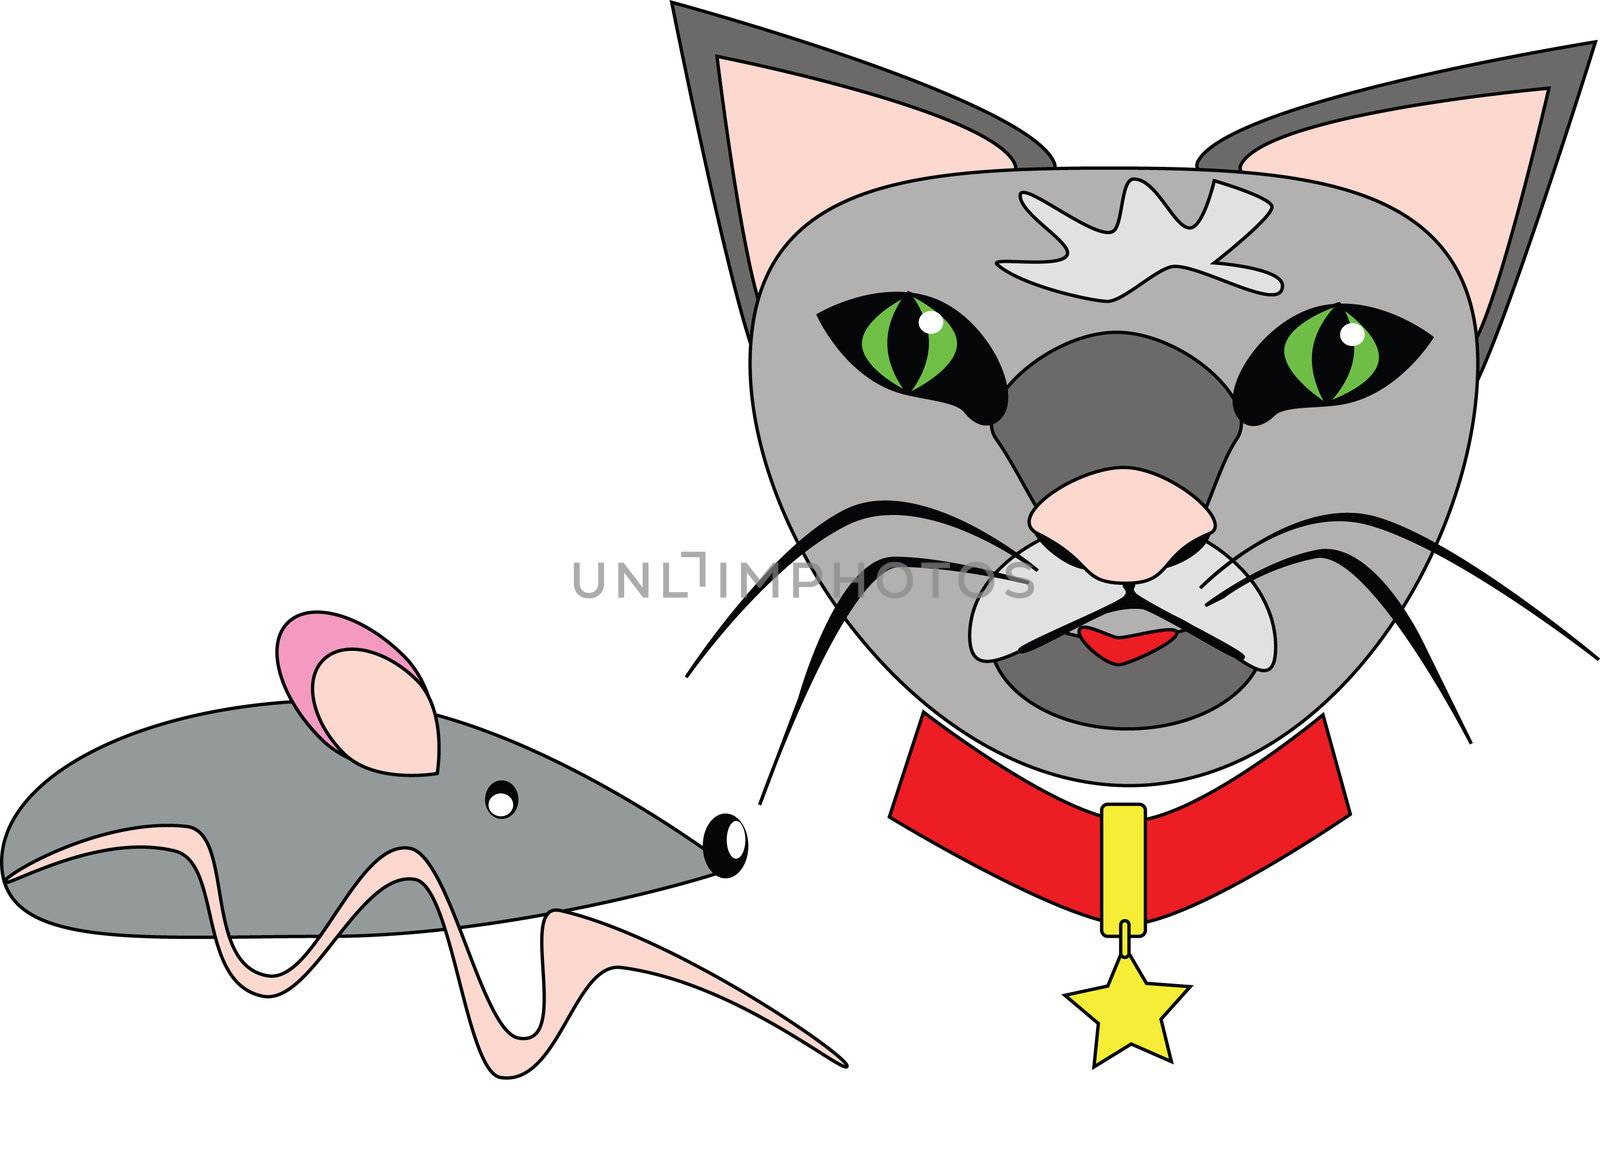 illustration of a cat with red collar and a mouse